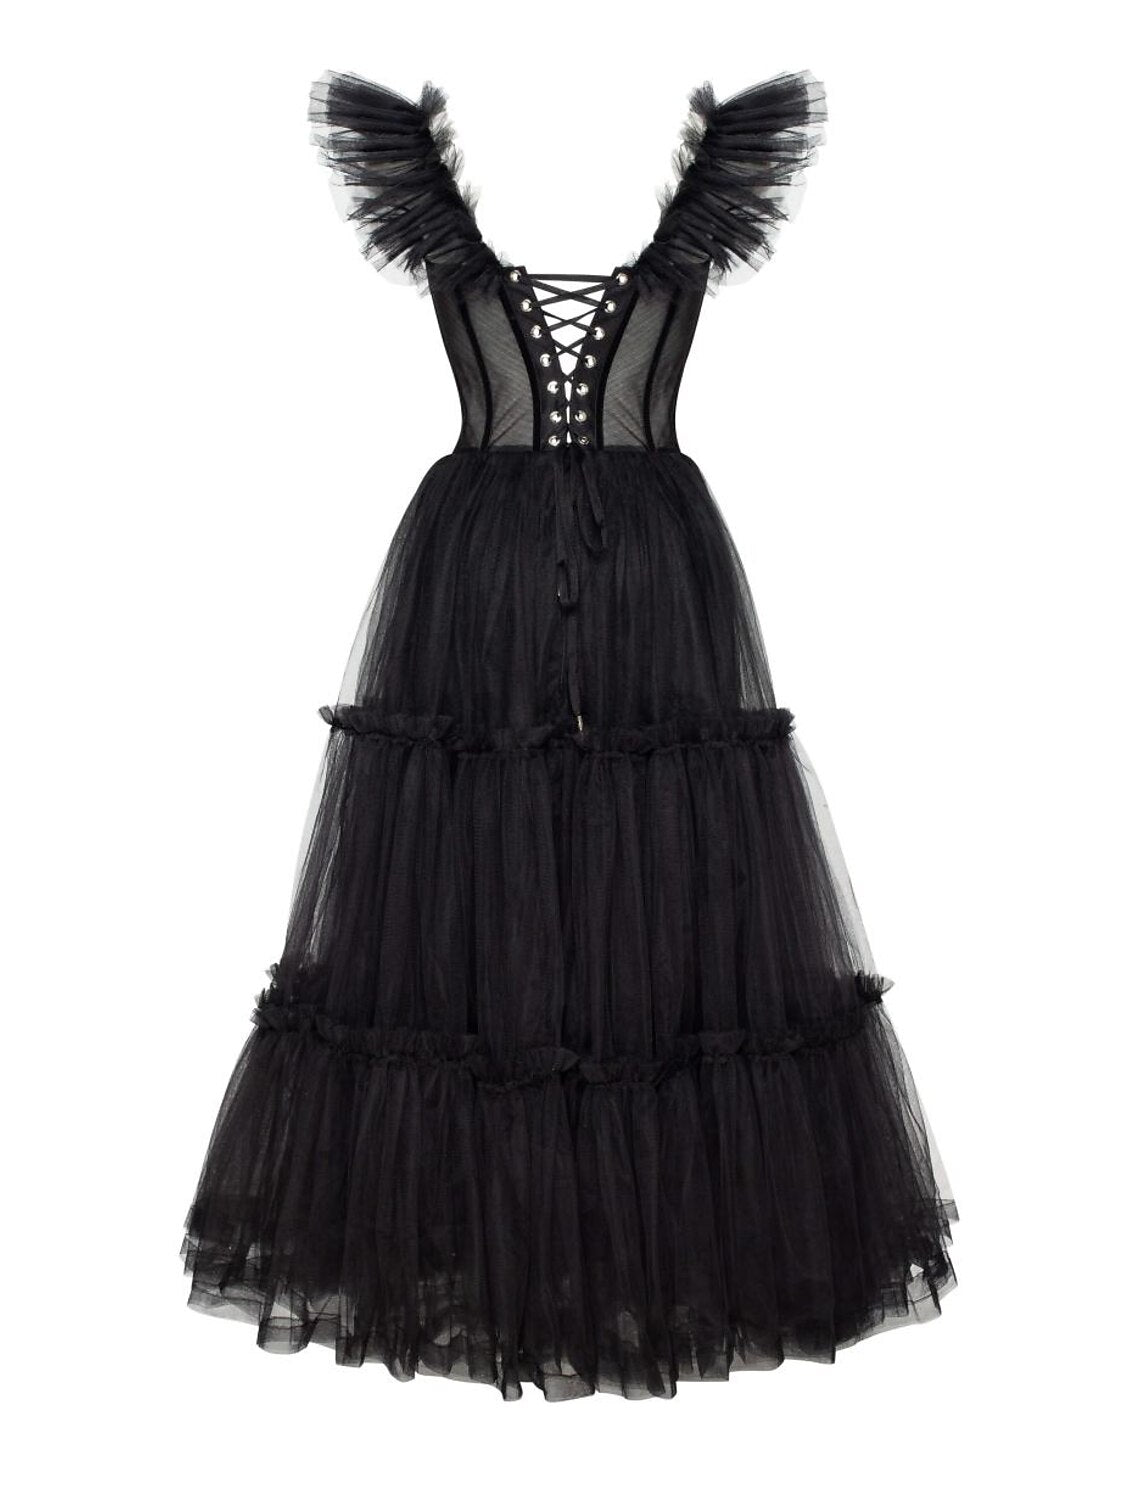 A-Line Prom Dresses Gothic Dress Masquerade Ankle Length Sleeveless Sweetheart Wednesday Addams Family Tulle Crisscross Back with Pleats Ruffles